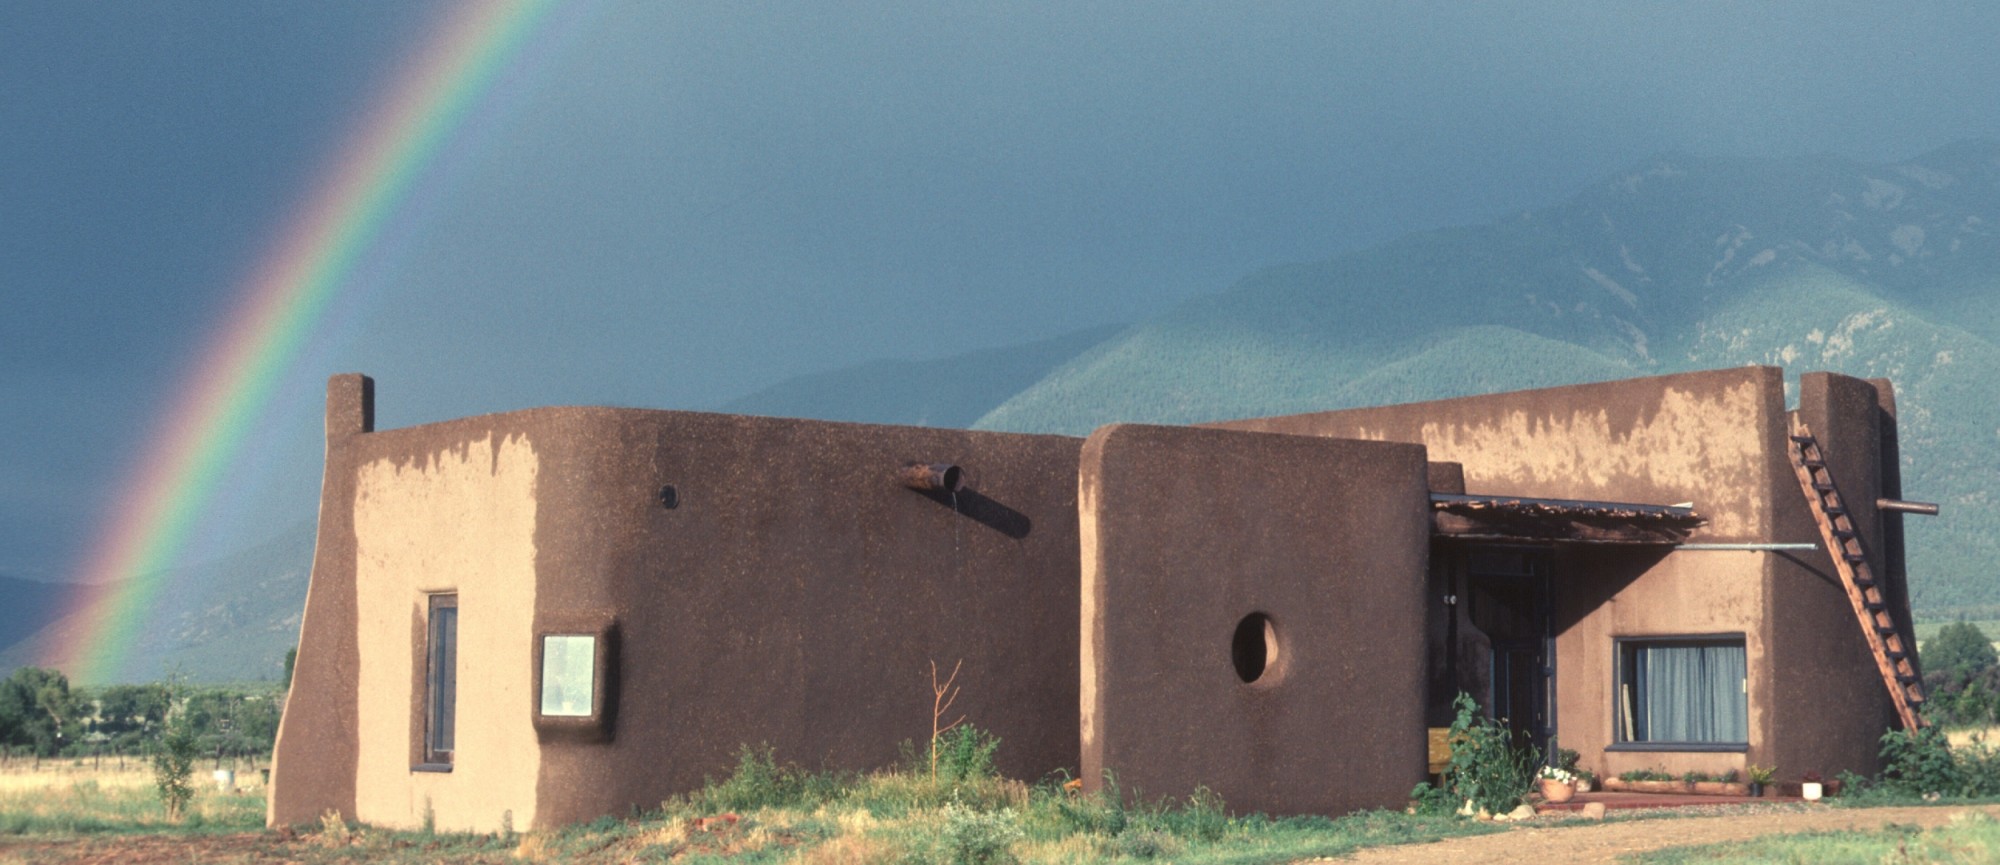 Hurtado and Mullican's home in Taos, New Mexico